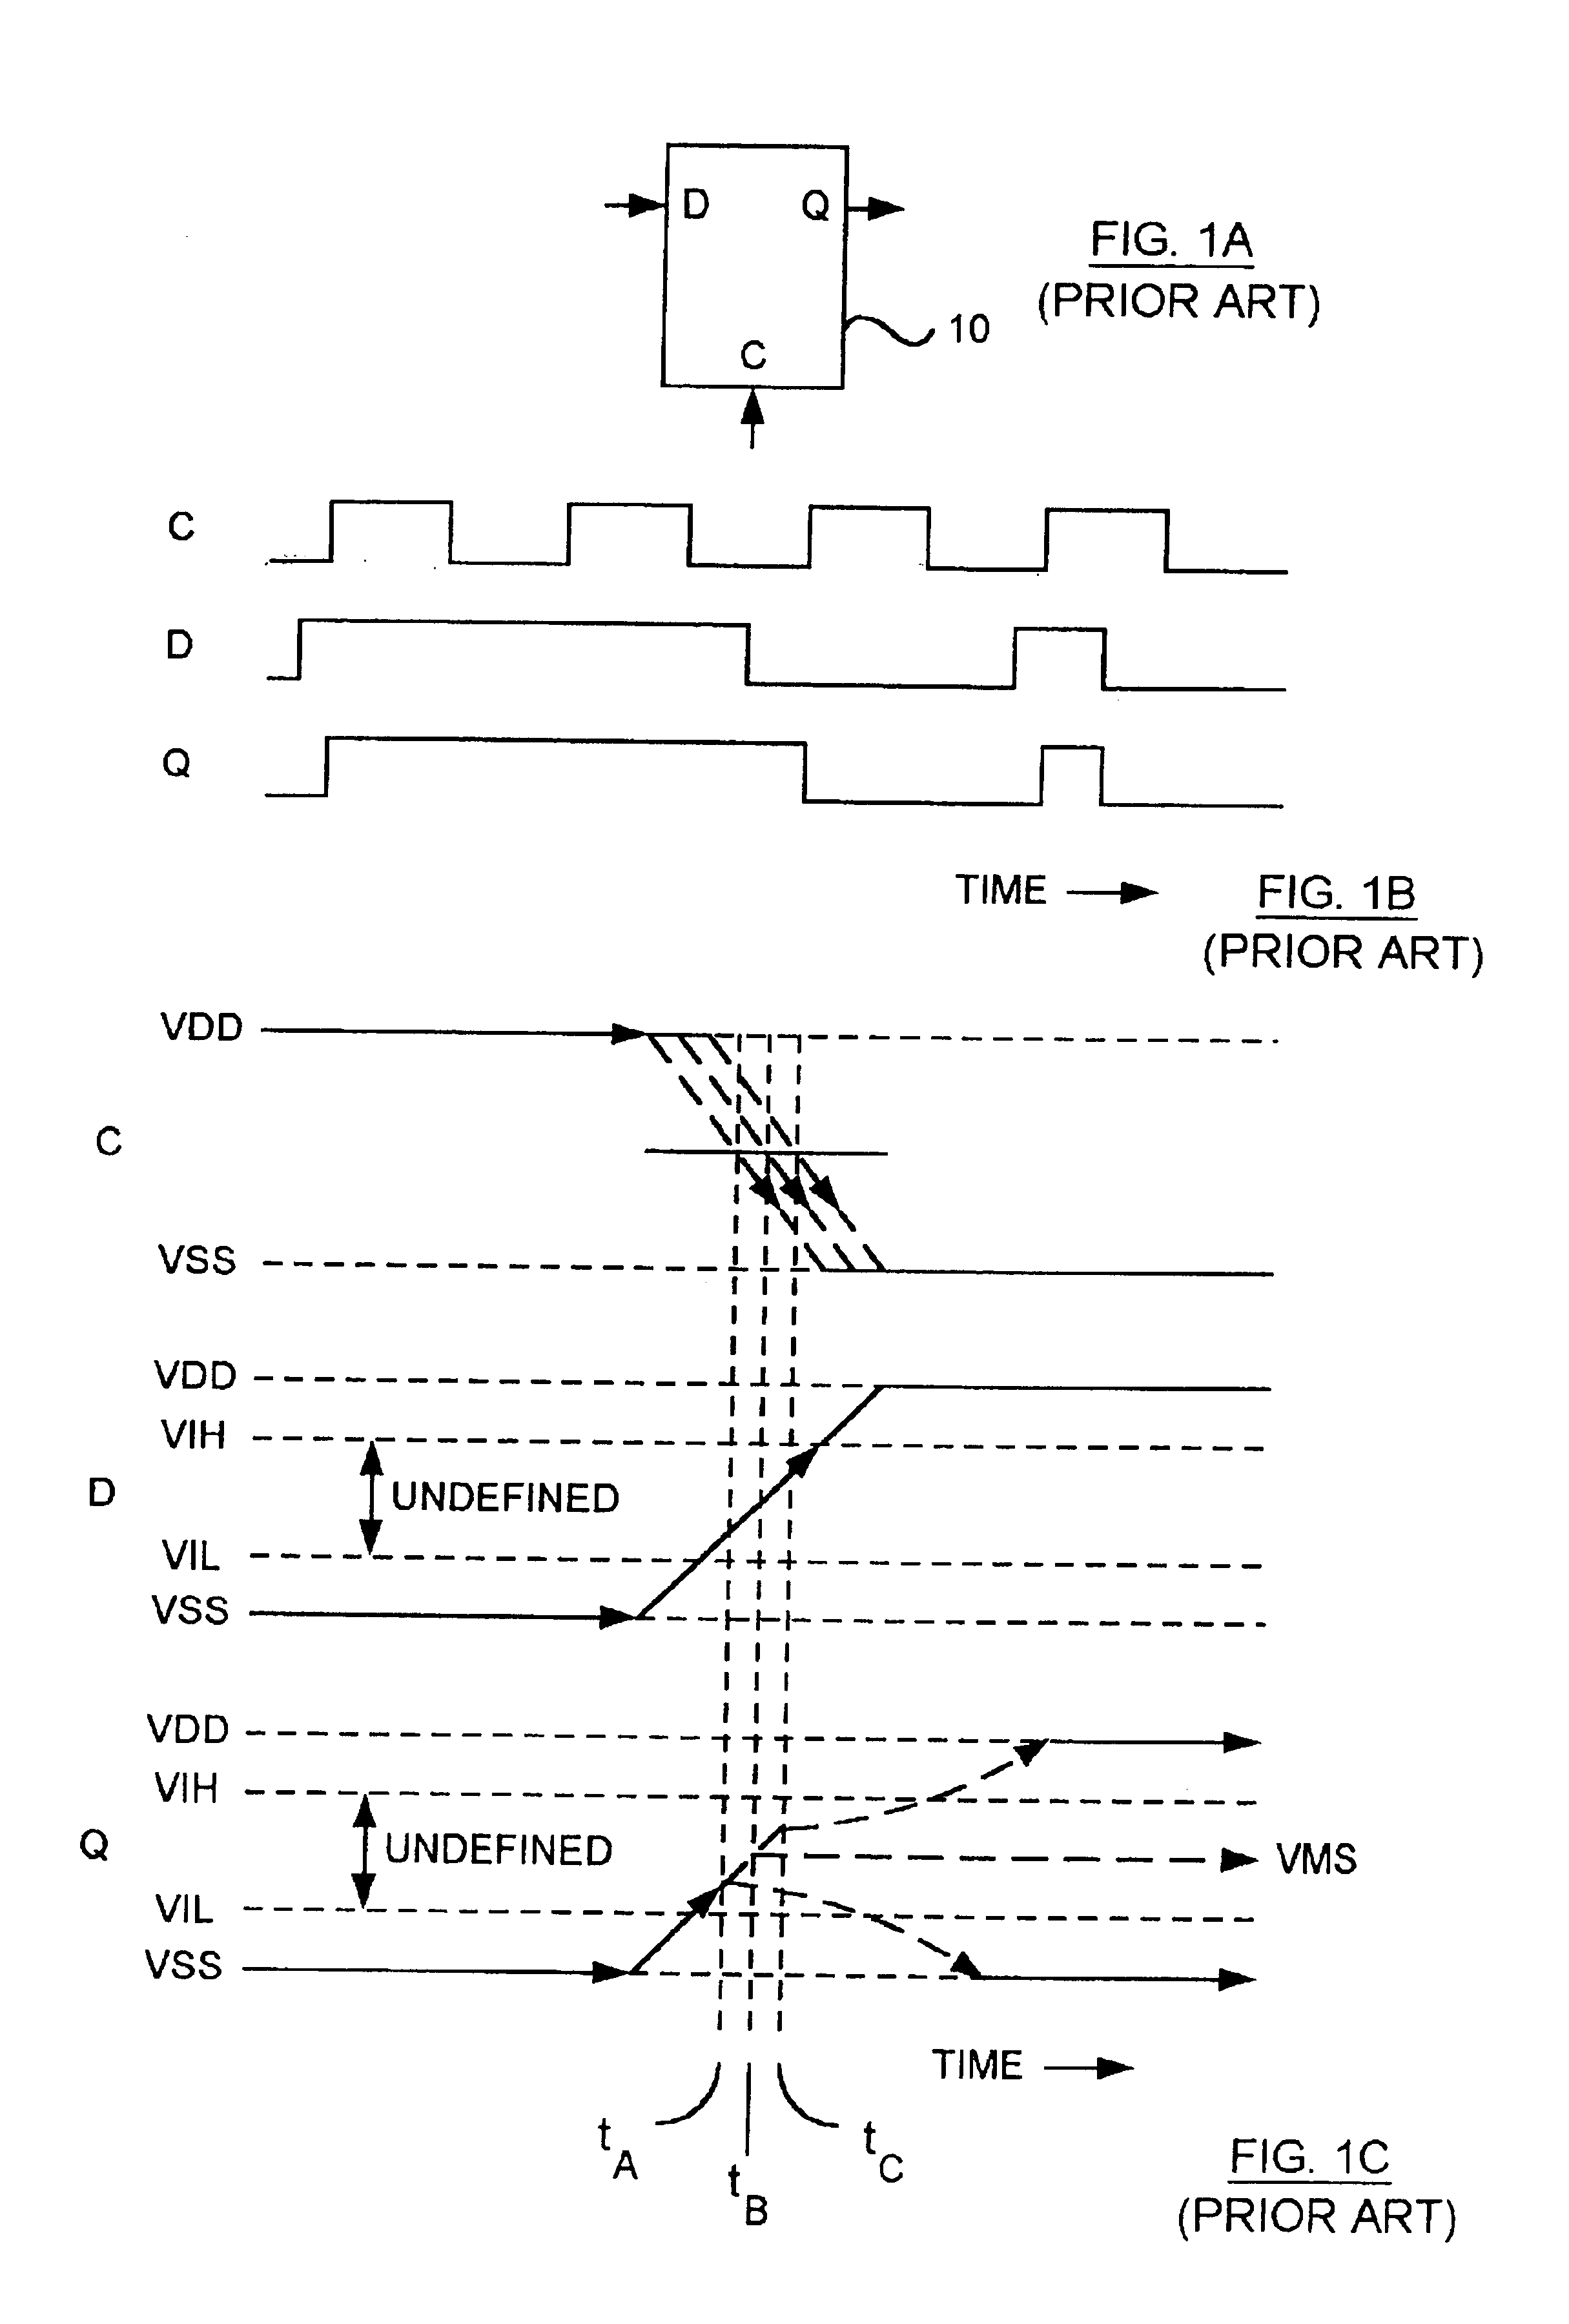 Clock signal selector circuit with reduced probability of erroneous output due to metastability